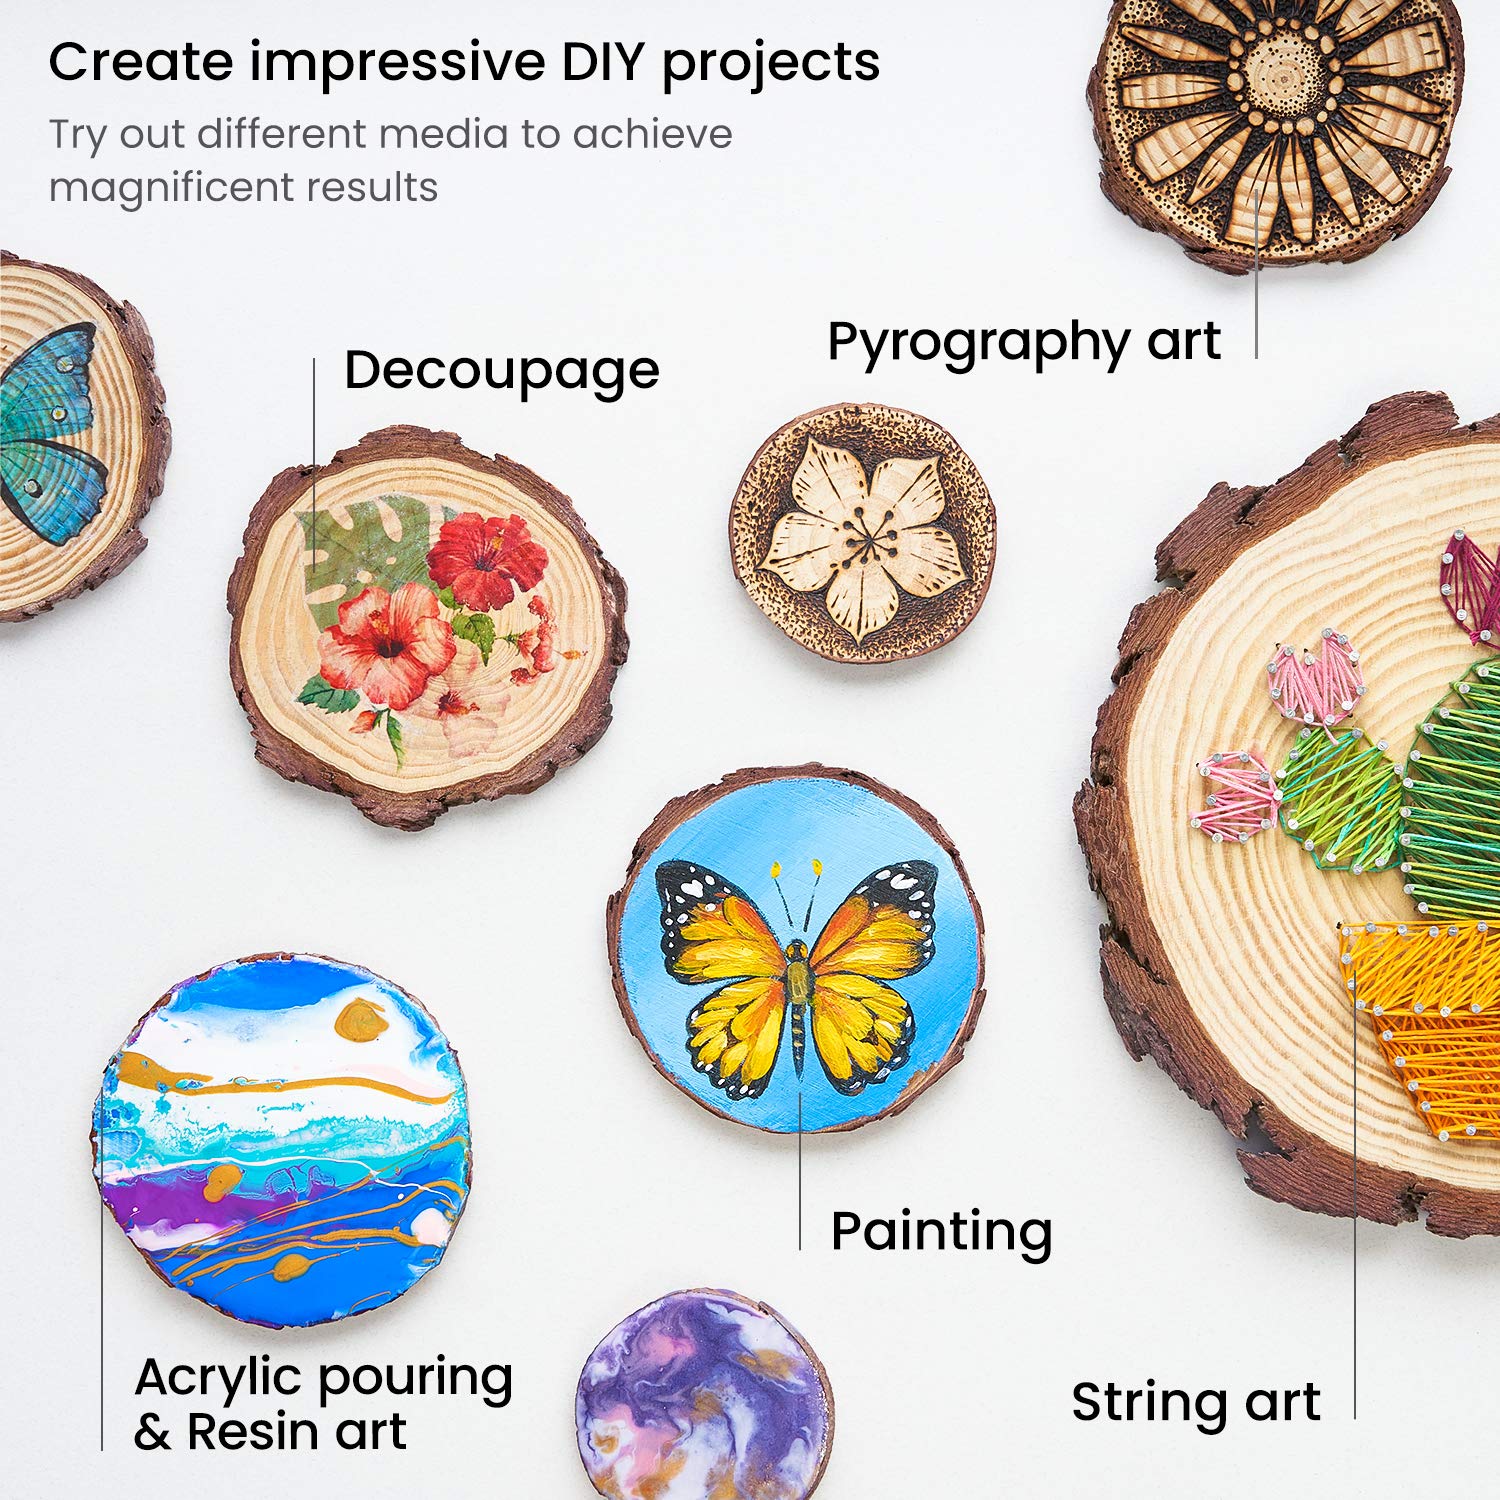 ARTEZA Natural Wood Slices,25 Pieces,9-10cm Diameter,1cm Thickness,Round Wood Discs for Crafts,Centerpieces & Paintings,Christmas Ornaments,Sanded & Polished Circles